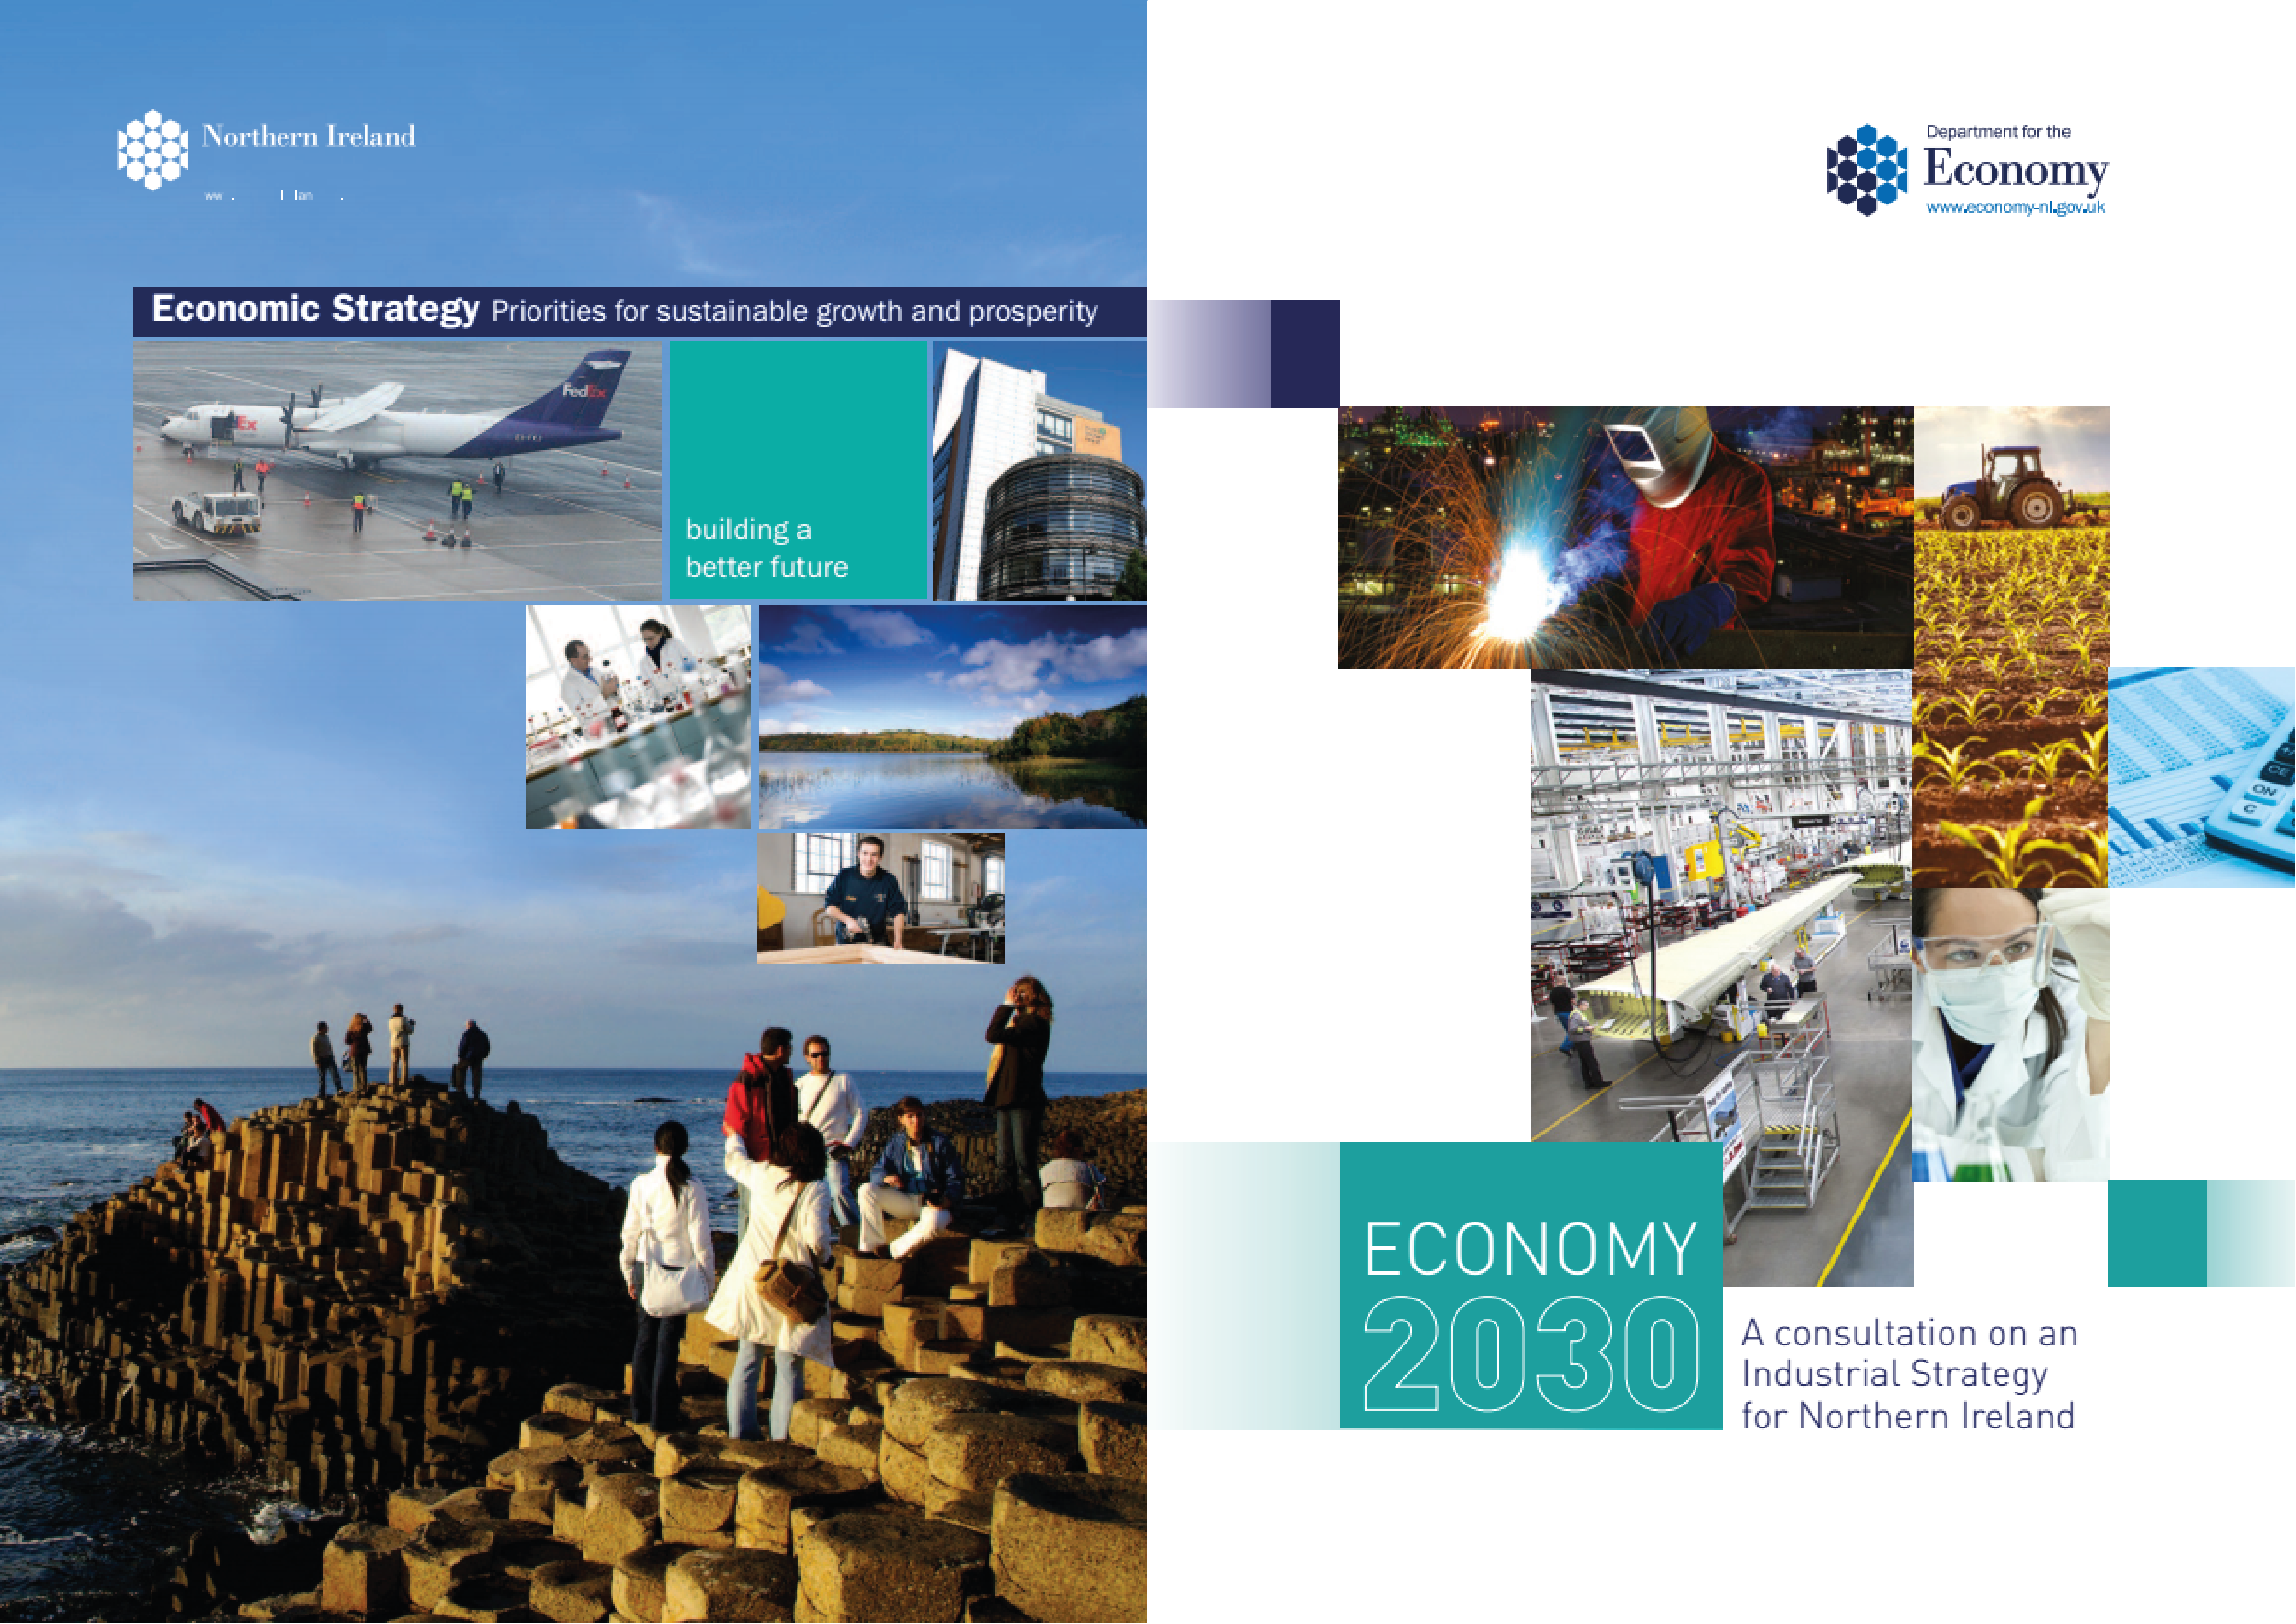 Cover pages of the 2012 Economic Strategy and 2017 draft Industrial Strategy